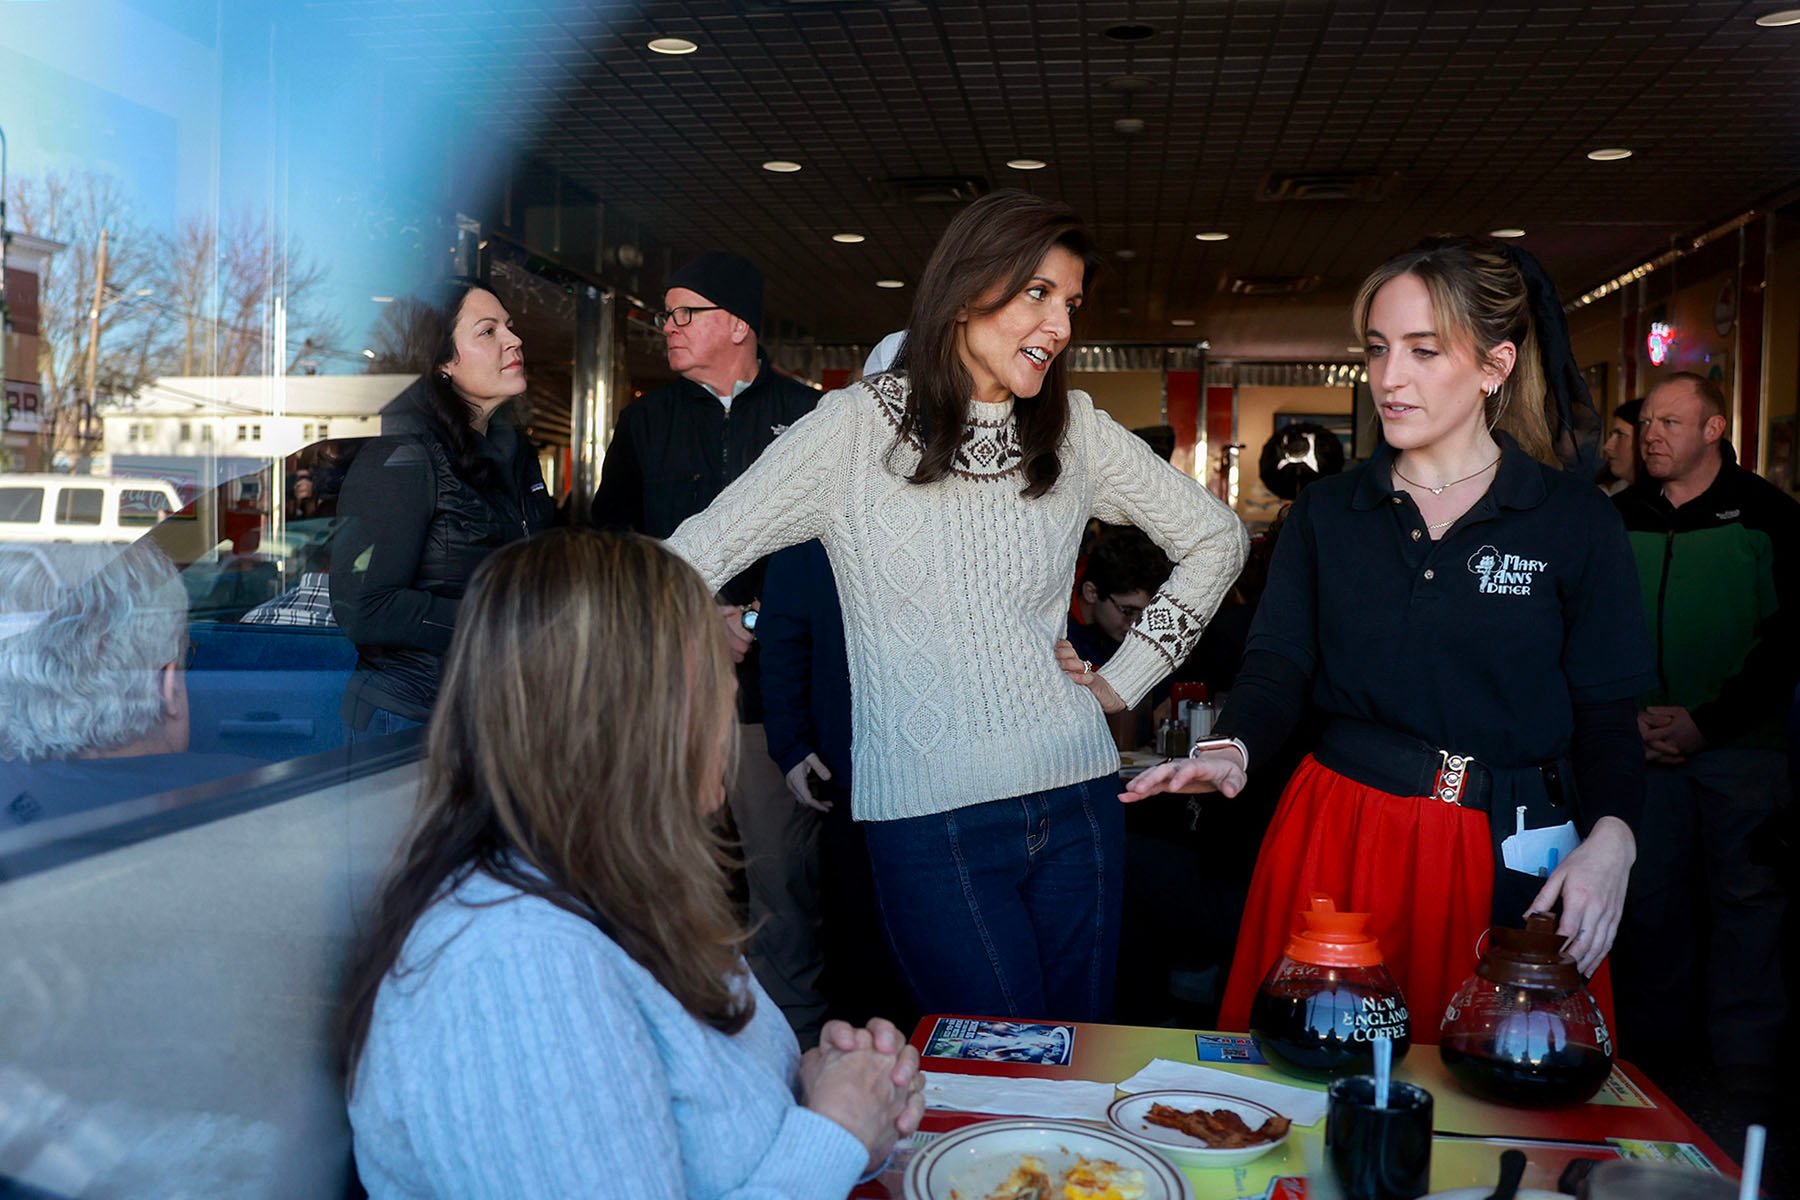 Nikki Haley makes a campaign stop to greet people at MaryAnn's diner on January 21, 2024, in Derry, New Hampshire.